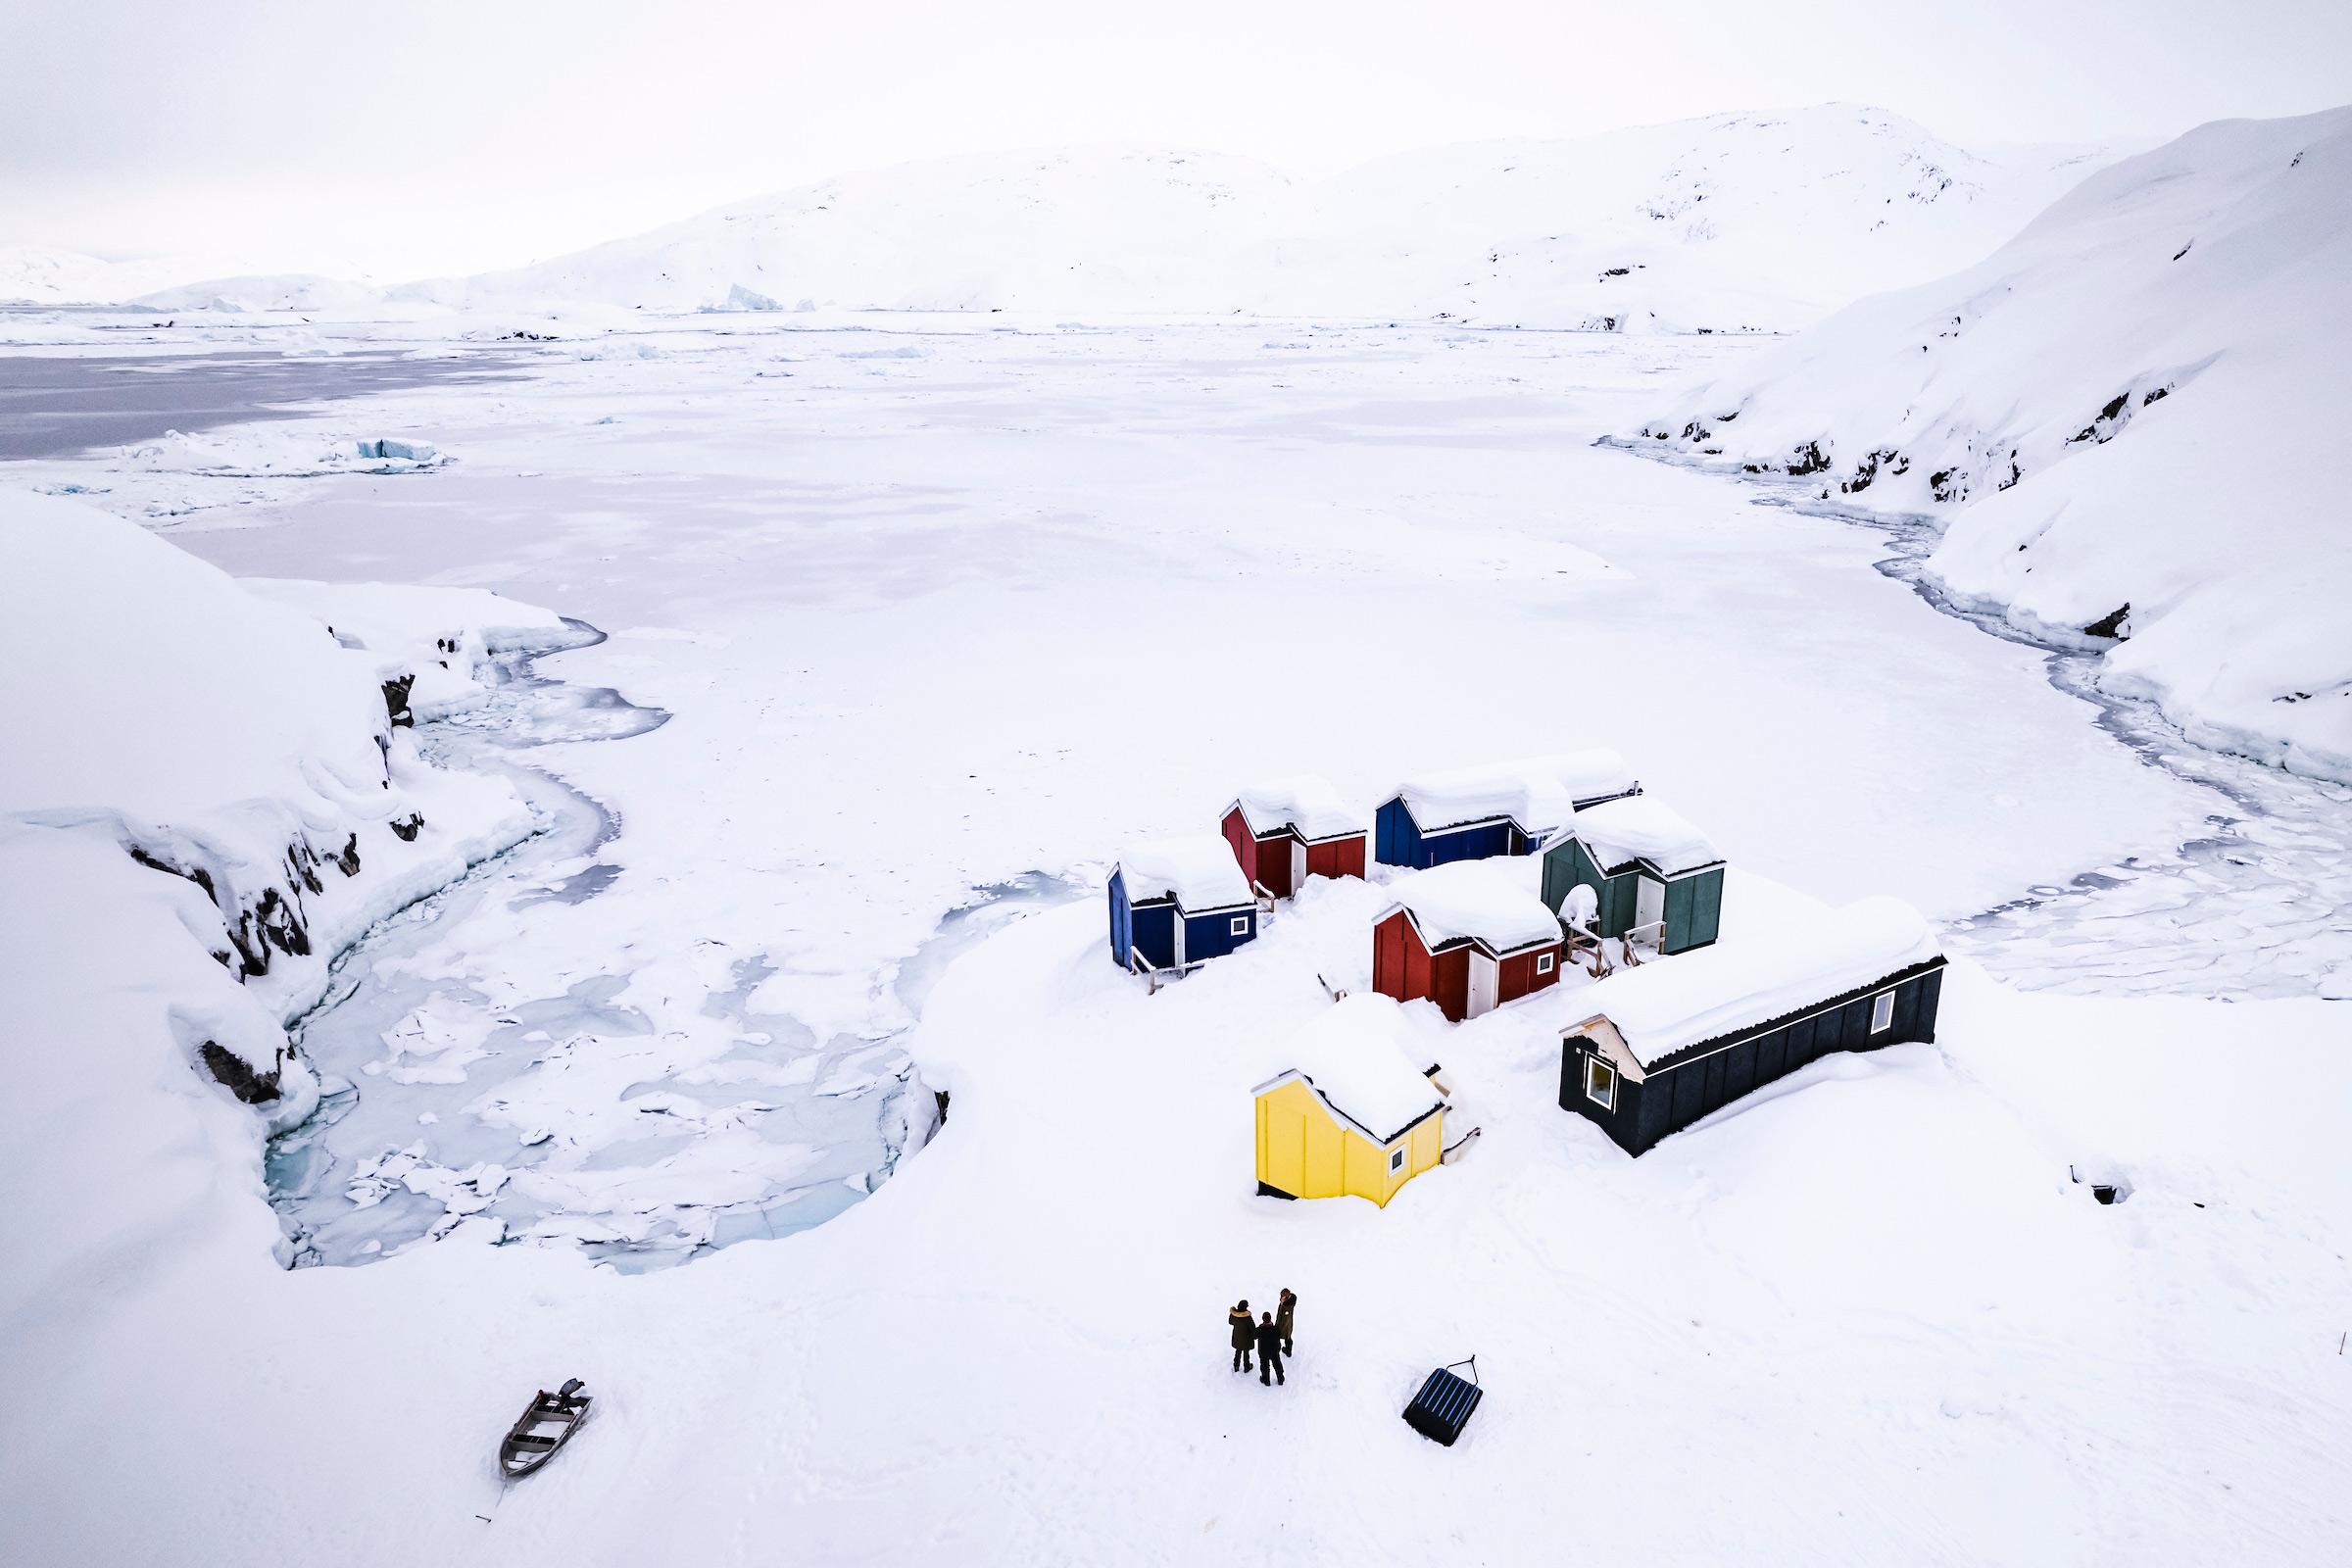 The camp by Arctioc Dream. The Icecamp. Photo by Aningaaq Rosing Carlsen - Visit Greenland